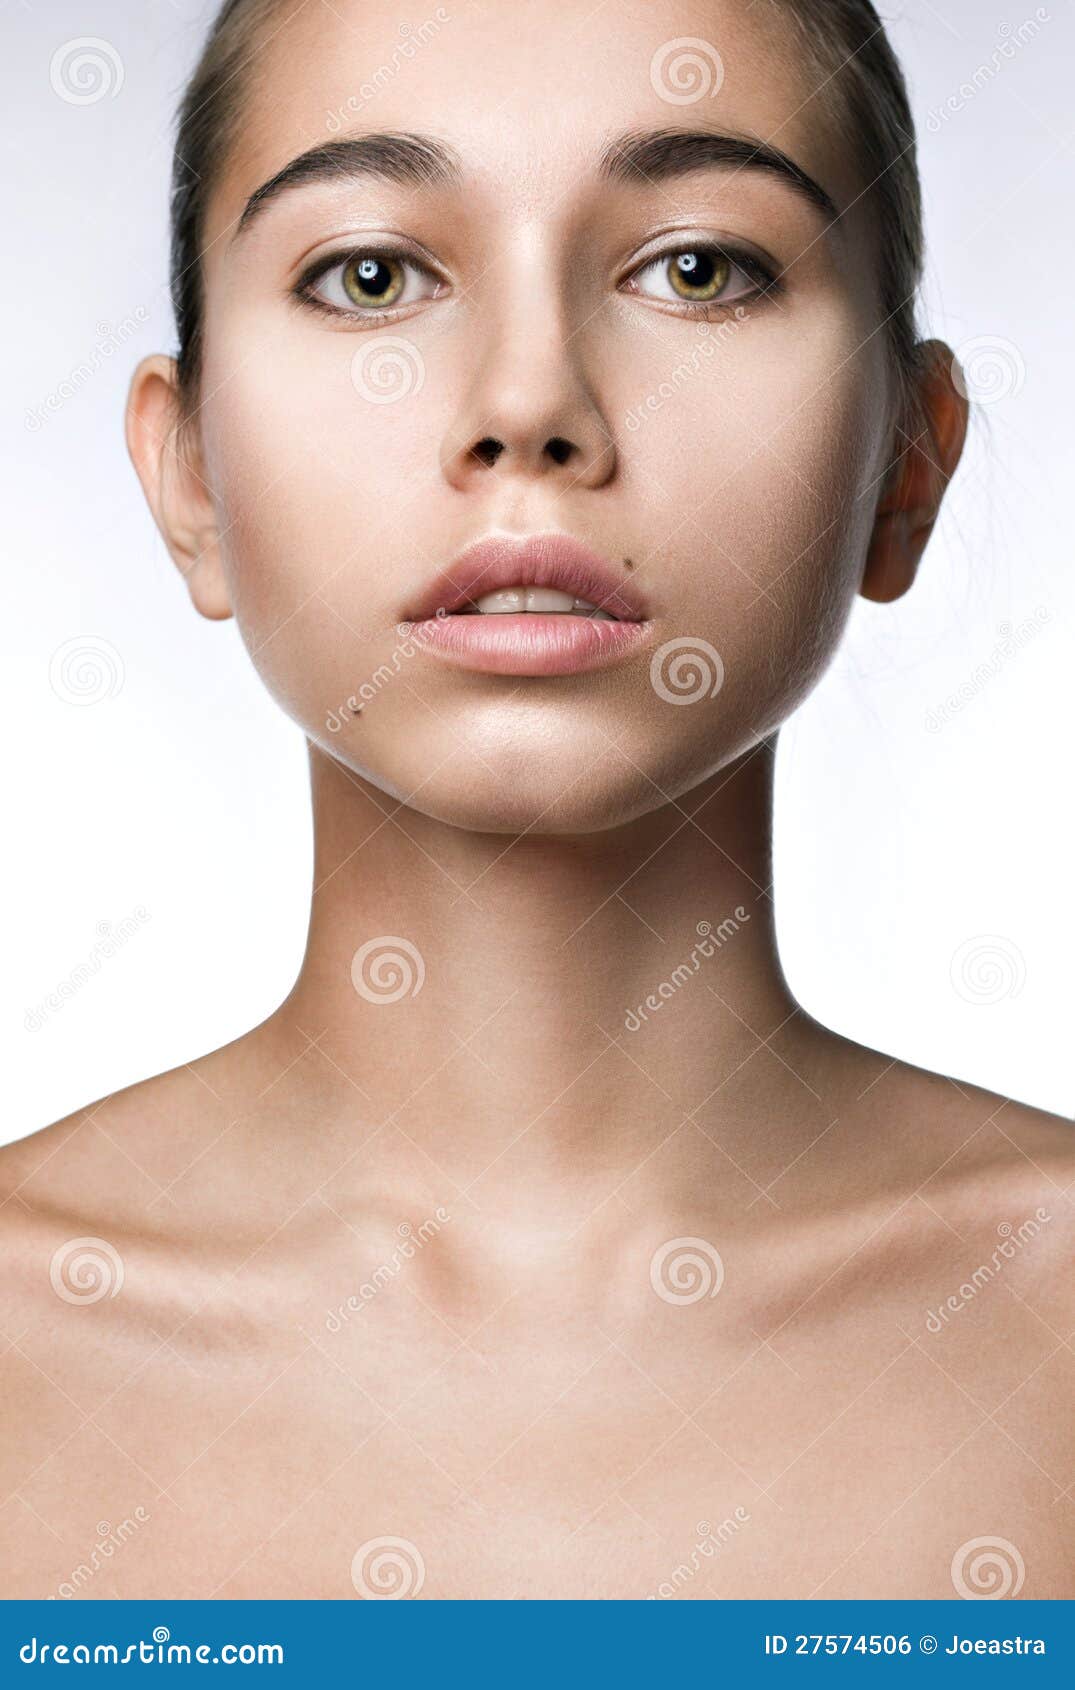 Clean Beauty Frontal Portrait Royalty Free Stock Image 